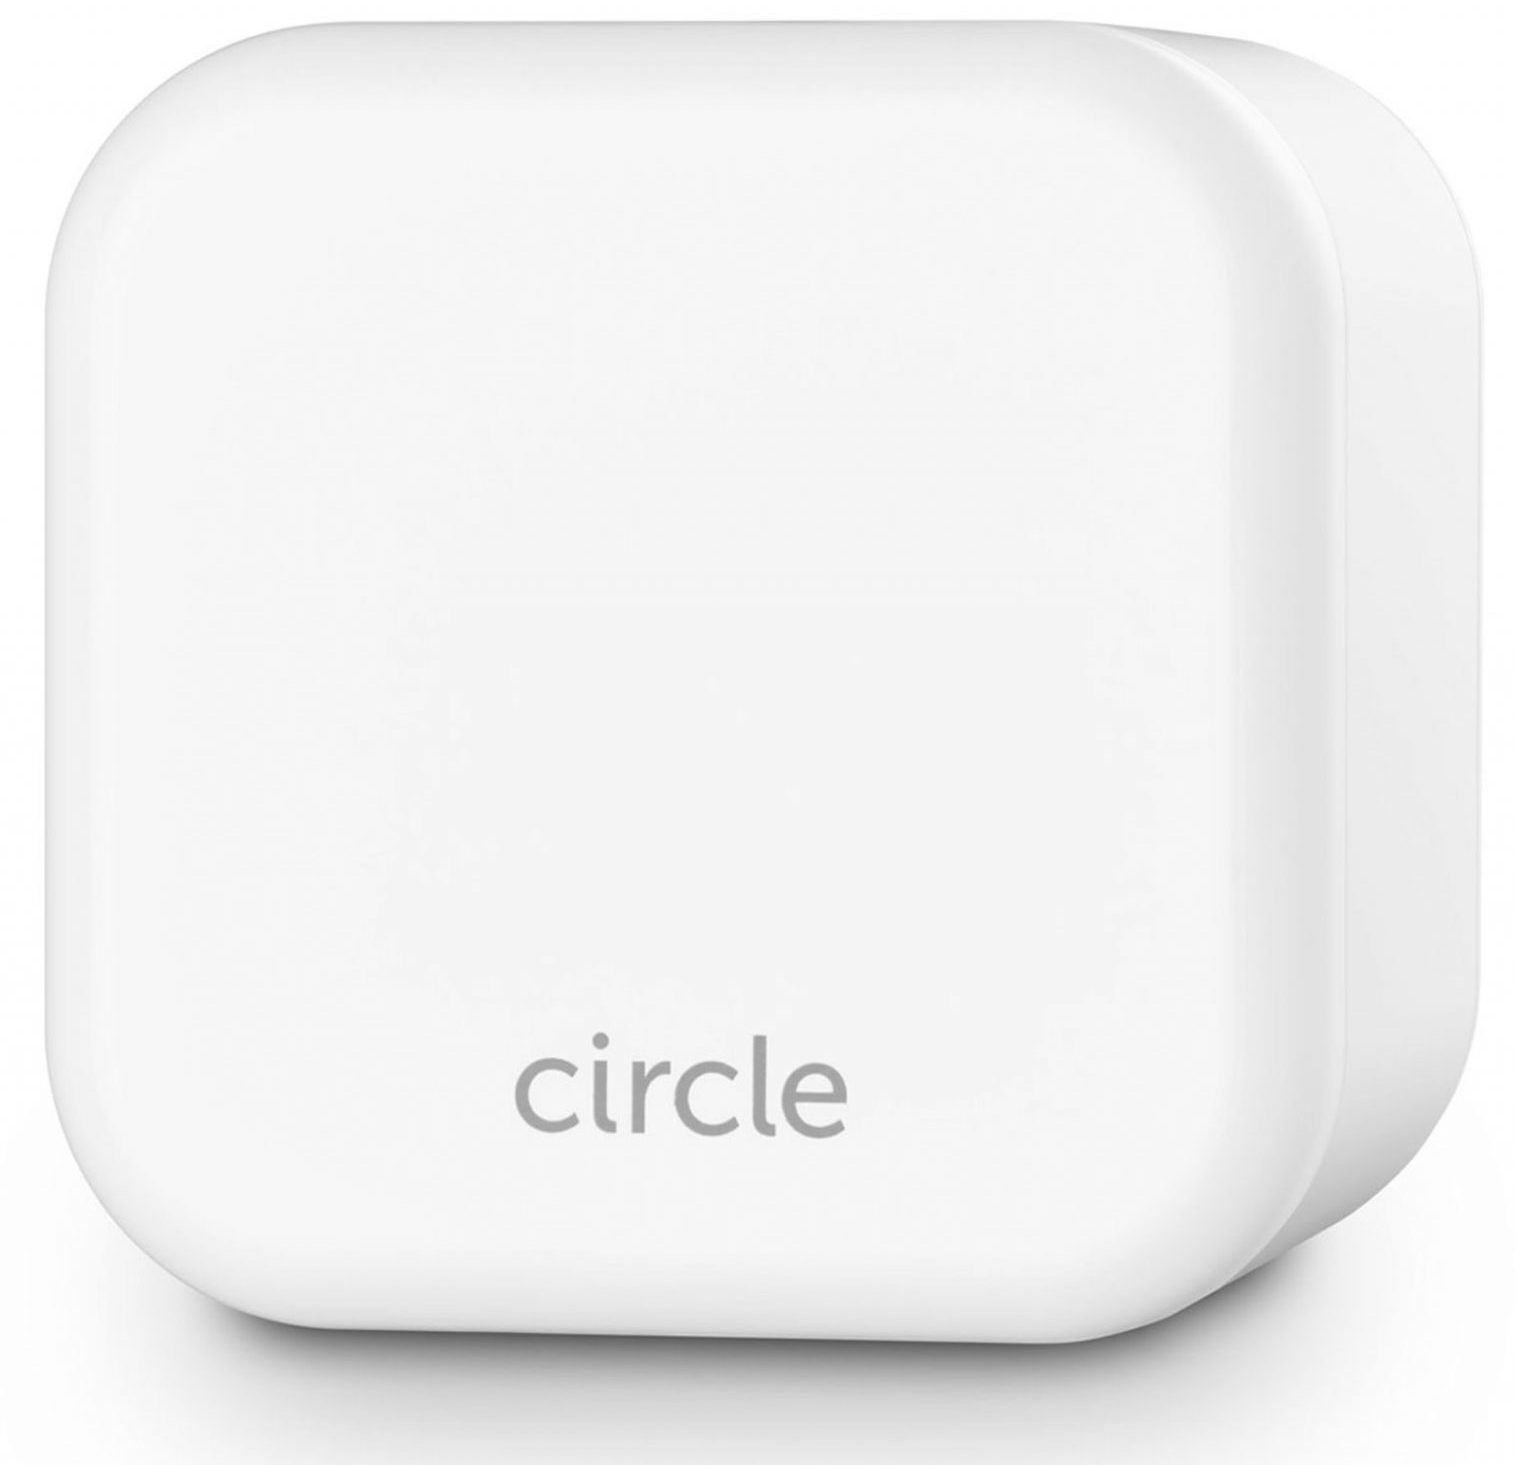 Circle router